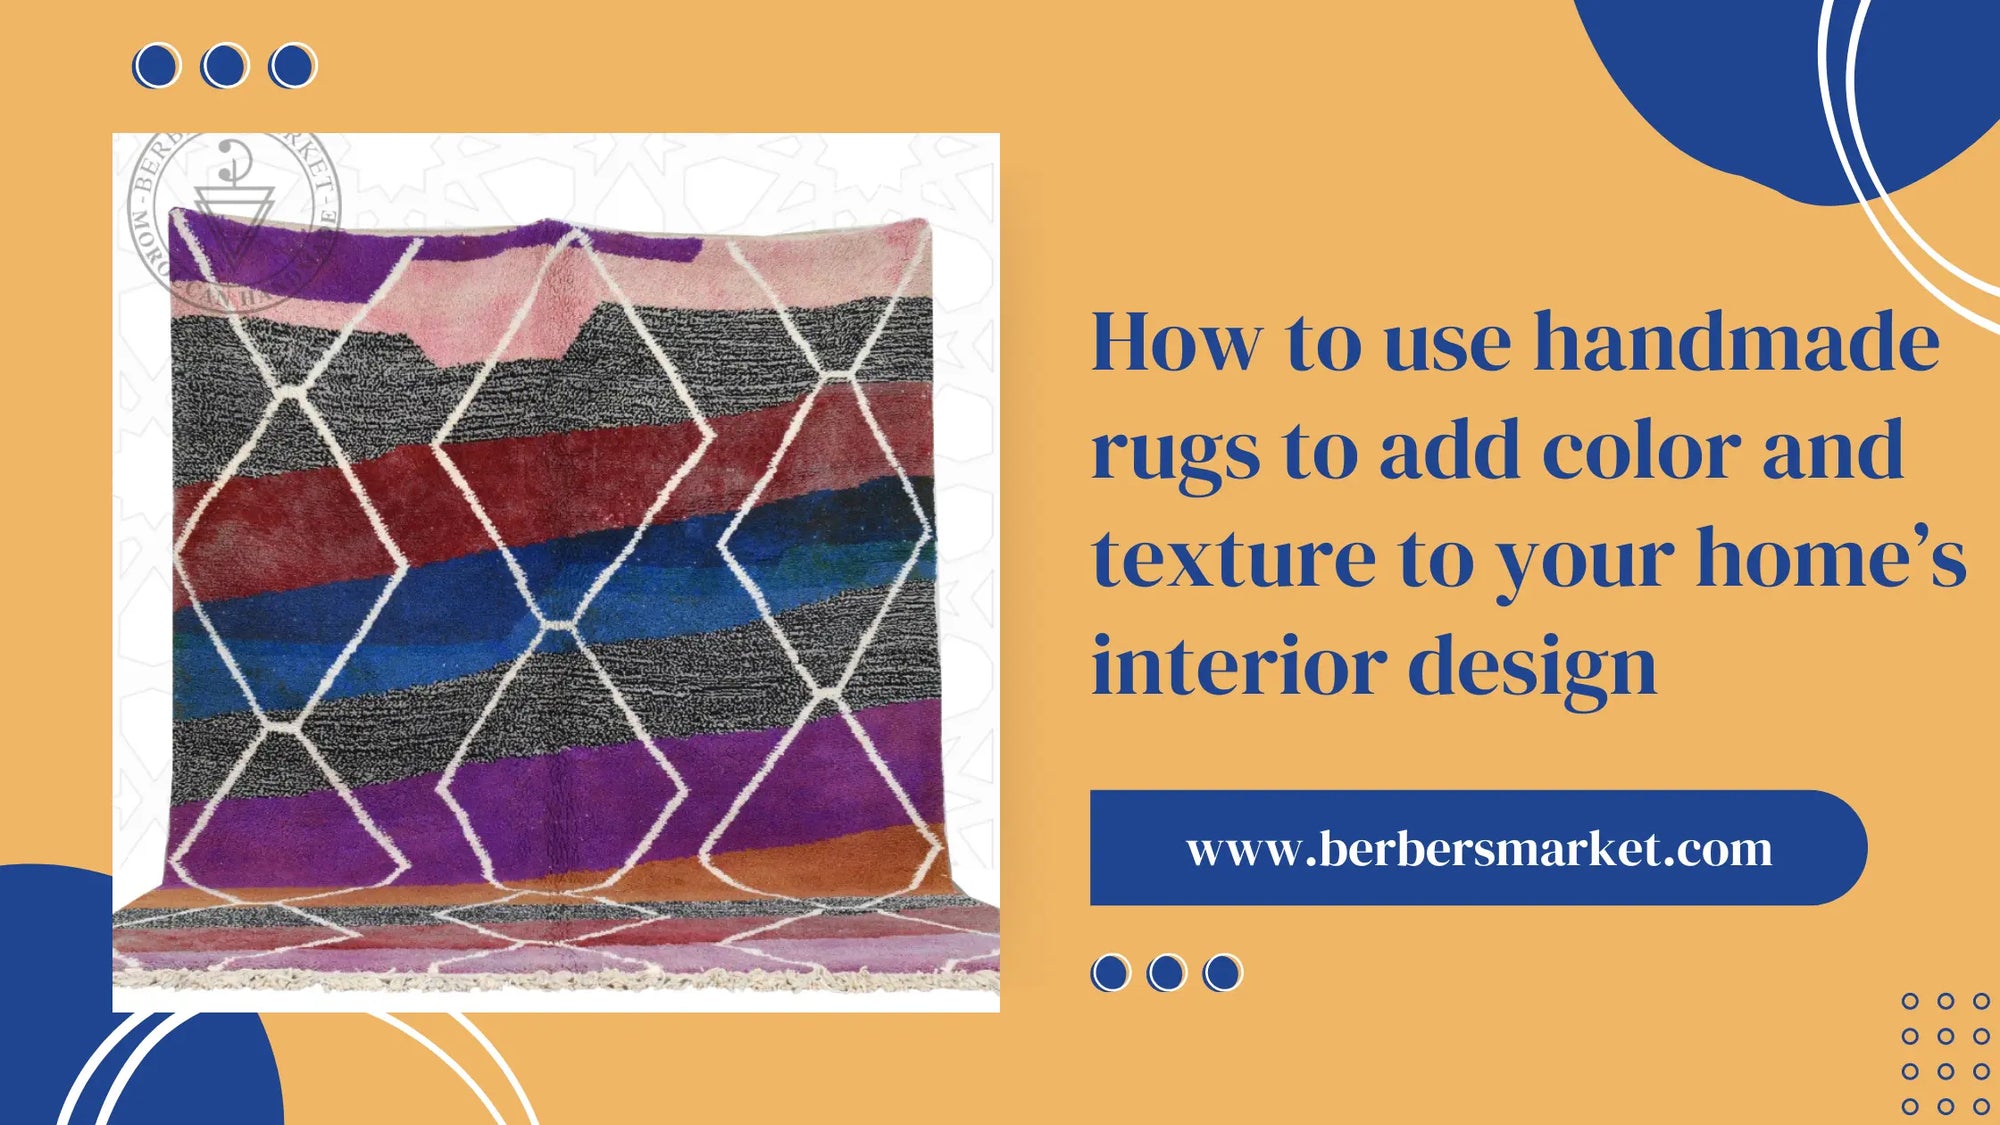  Blog banner talking about: "How to use handmade rugs to add color and texture to your home’s interior design" with a picture showing a colorful Beni ourain rug with diamond pattern.